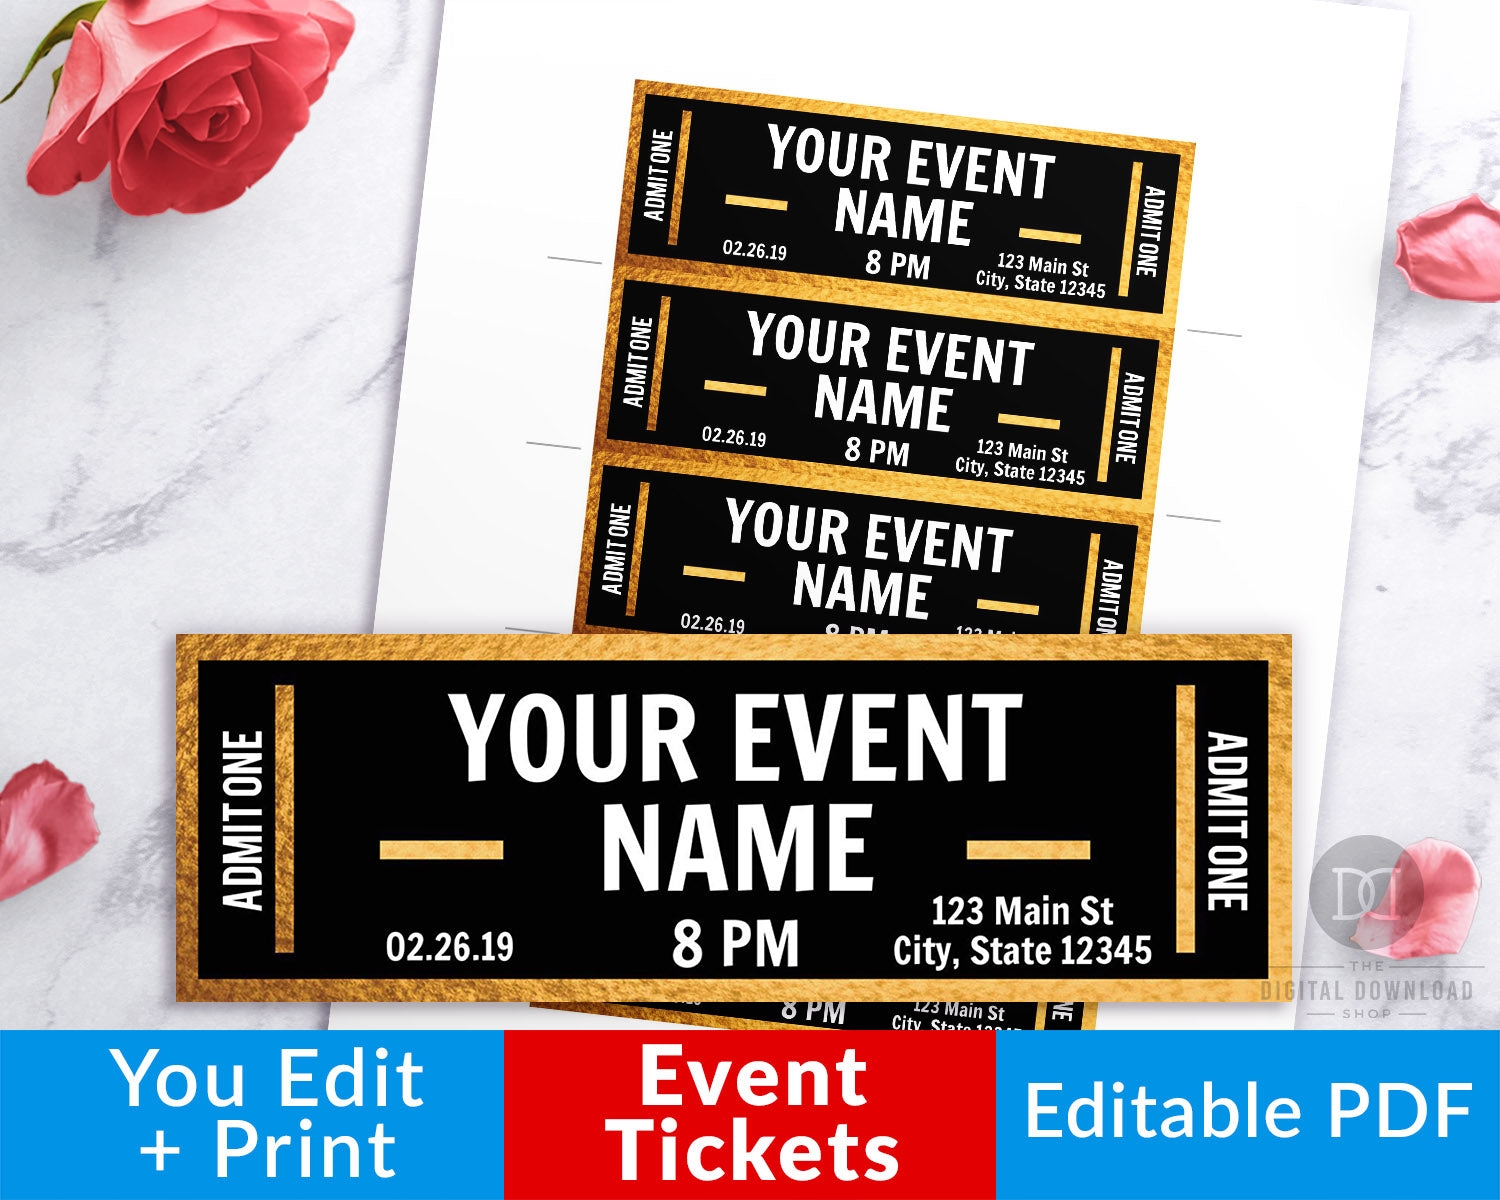 blank event ticket template